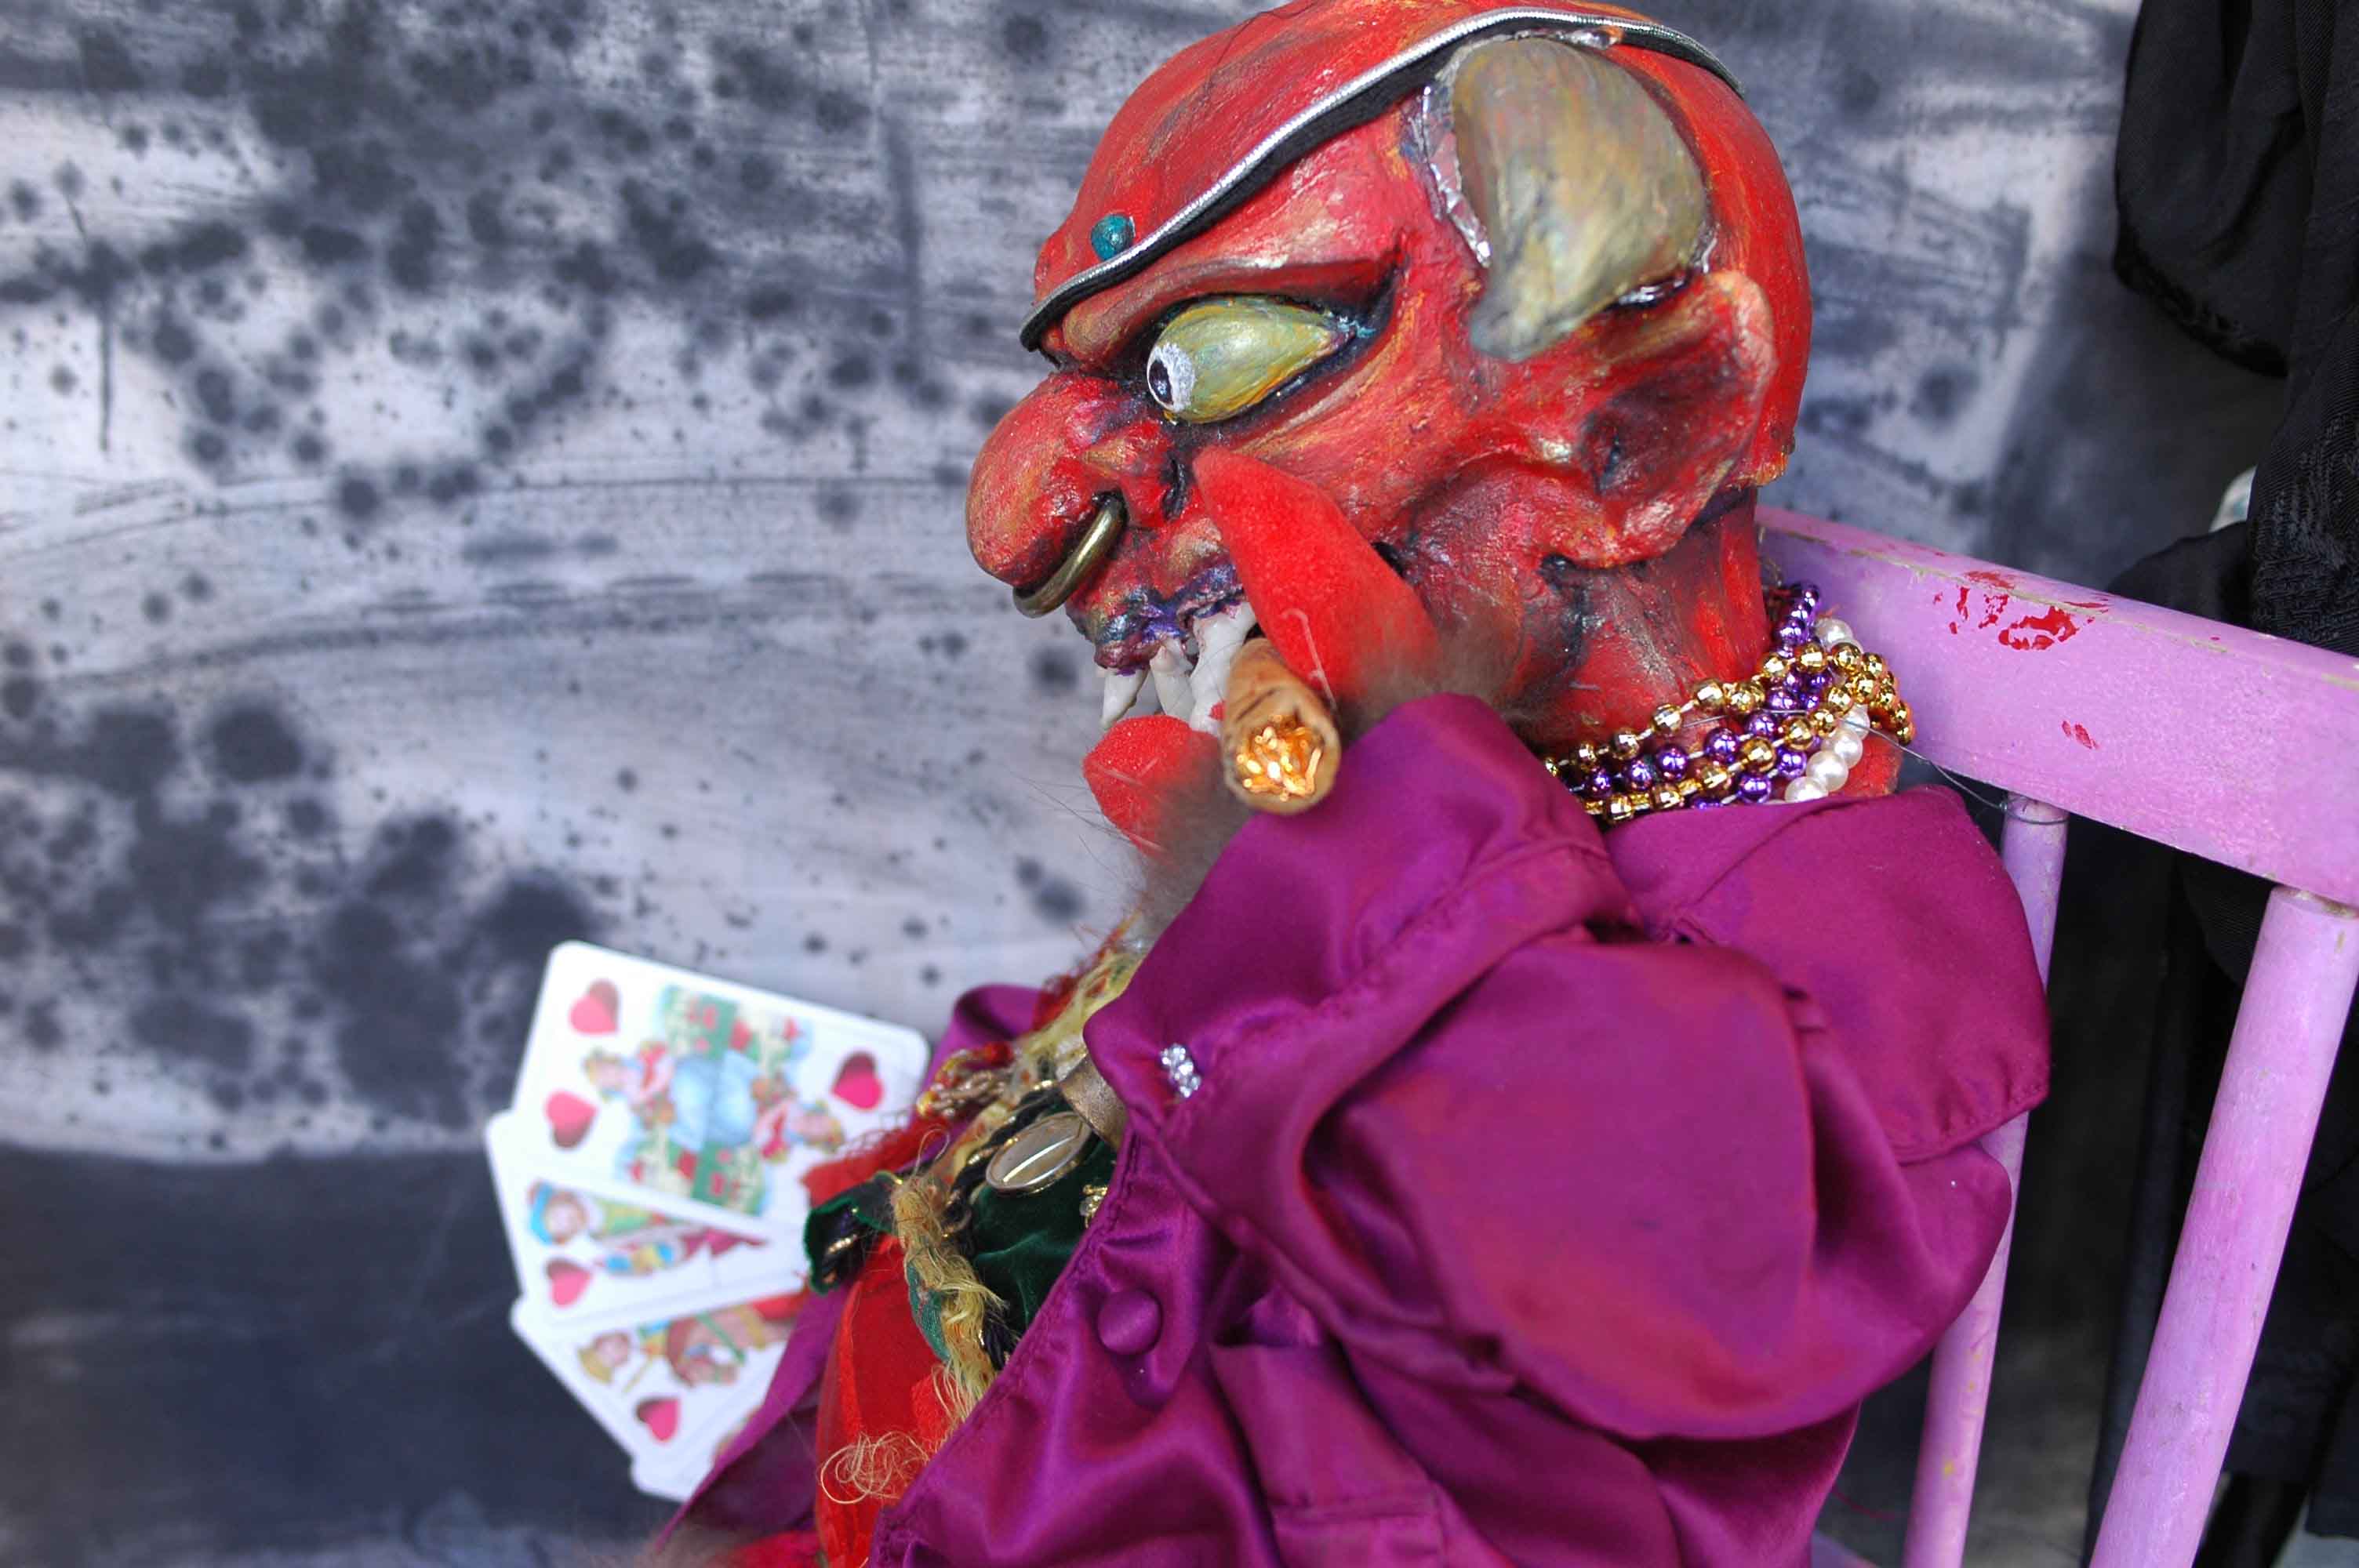 Beelzebub puppet by Xstine Cook from 